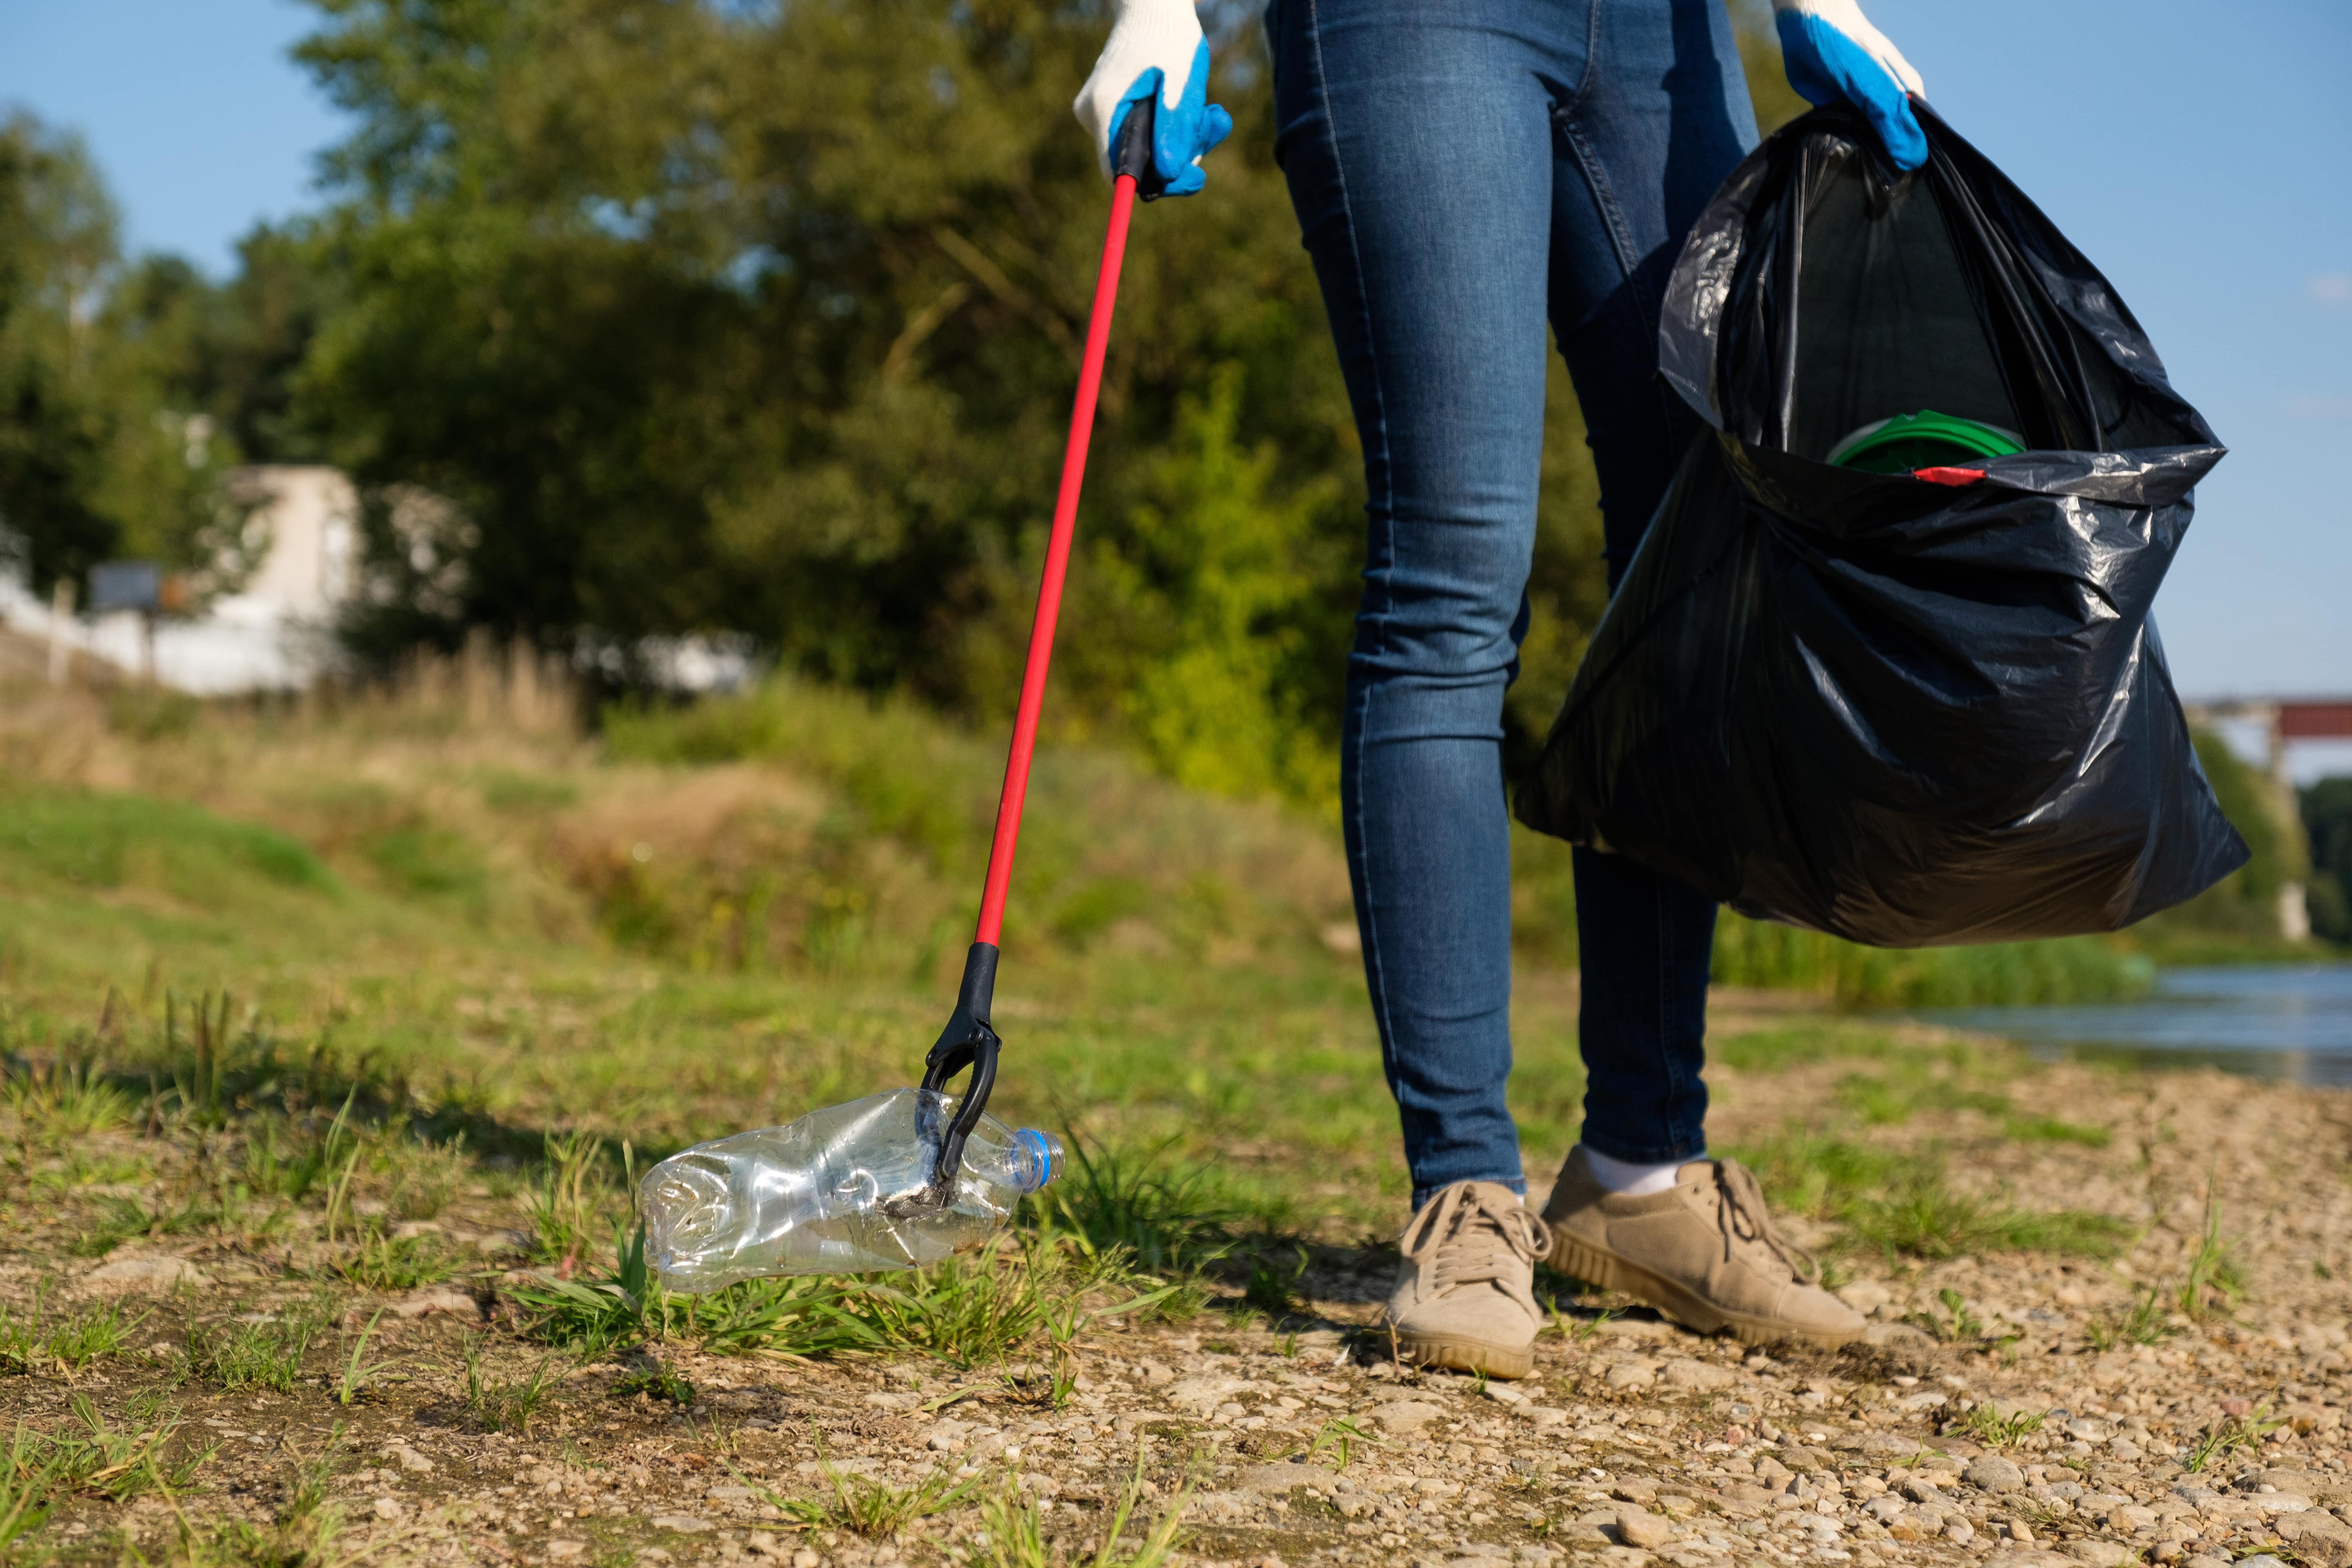 A woman with gloved hands uses a litter-picker to pick up a plastic bottle with one hand and carries an open bin bag in the other.